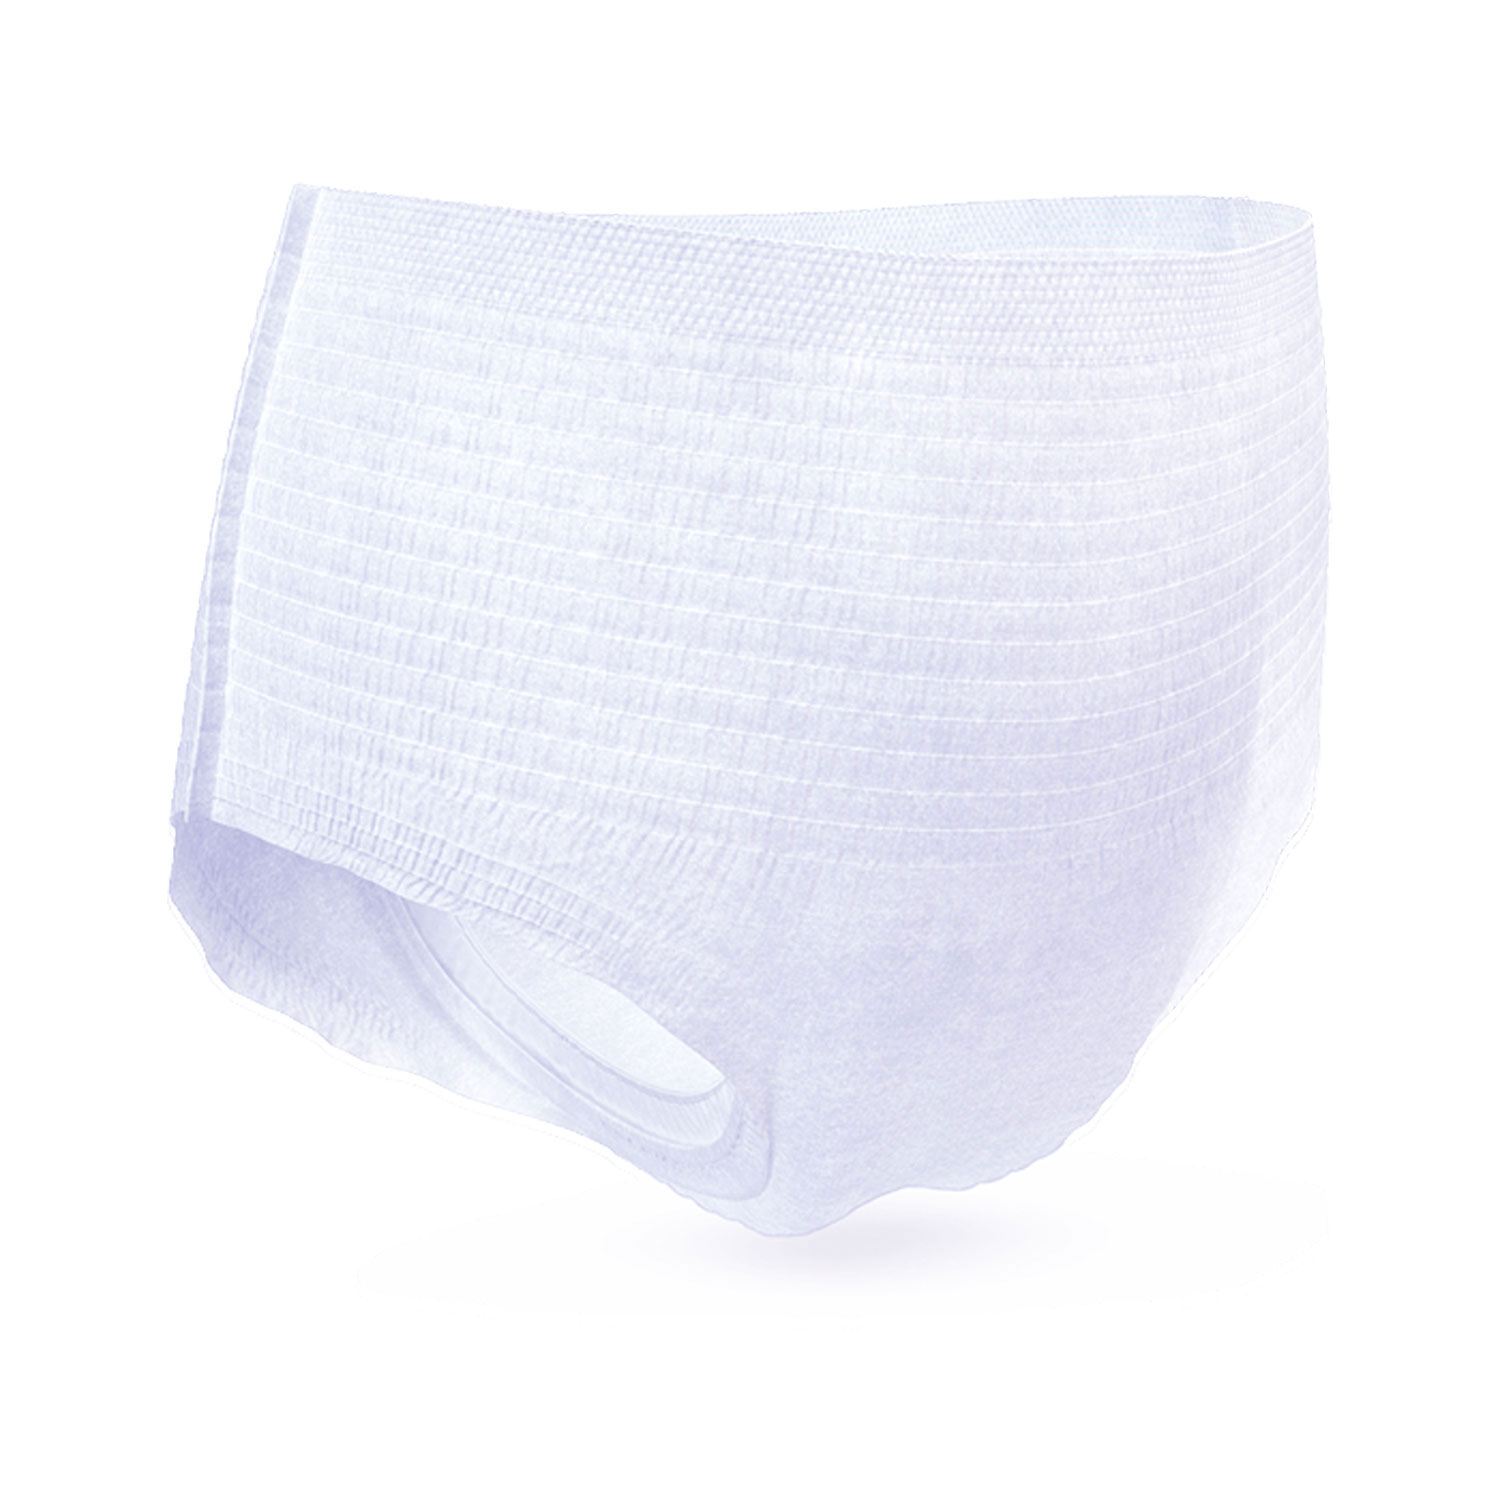 TENA Ultimate Underwear - On The Mend Medical Supplies & Equipment